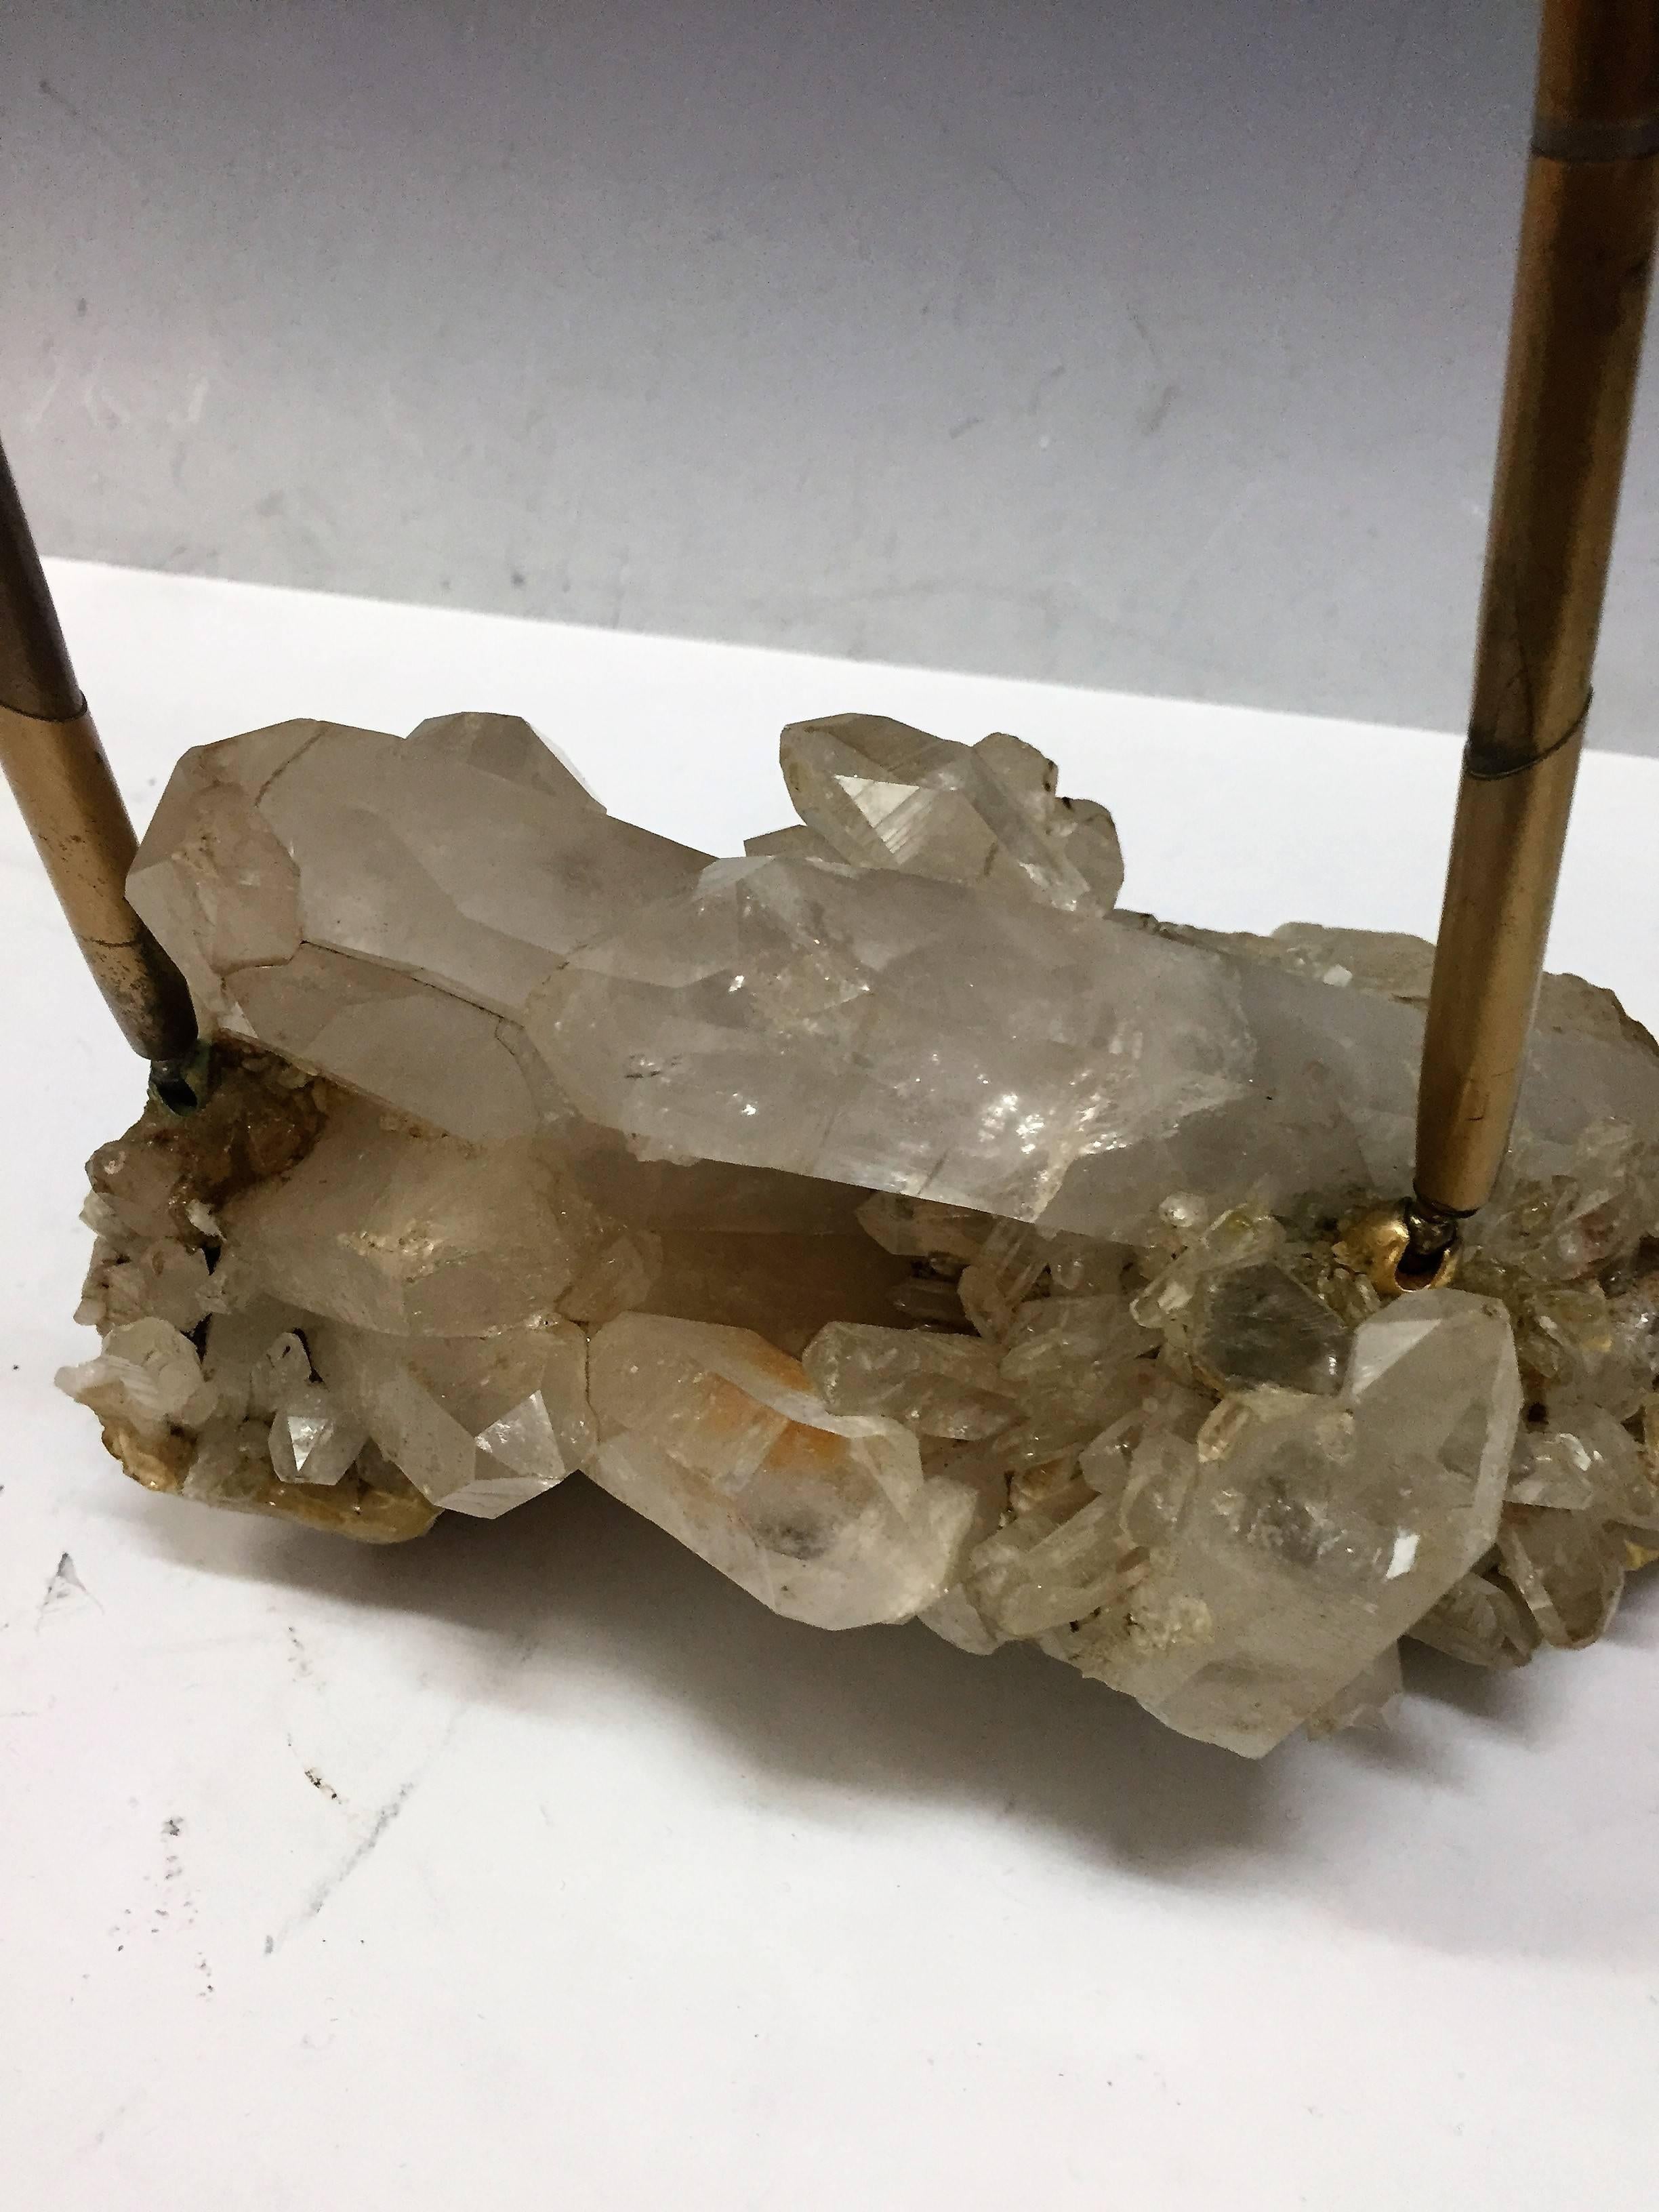 Awesome natural quartz crystal desk accessory designed by Carole Stupell for your high end modernistic desk fitted with two polished brass pens. A rare and scarce design.